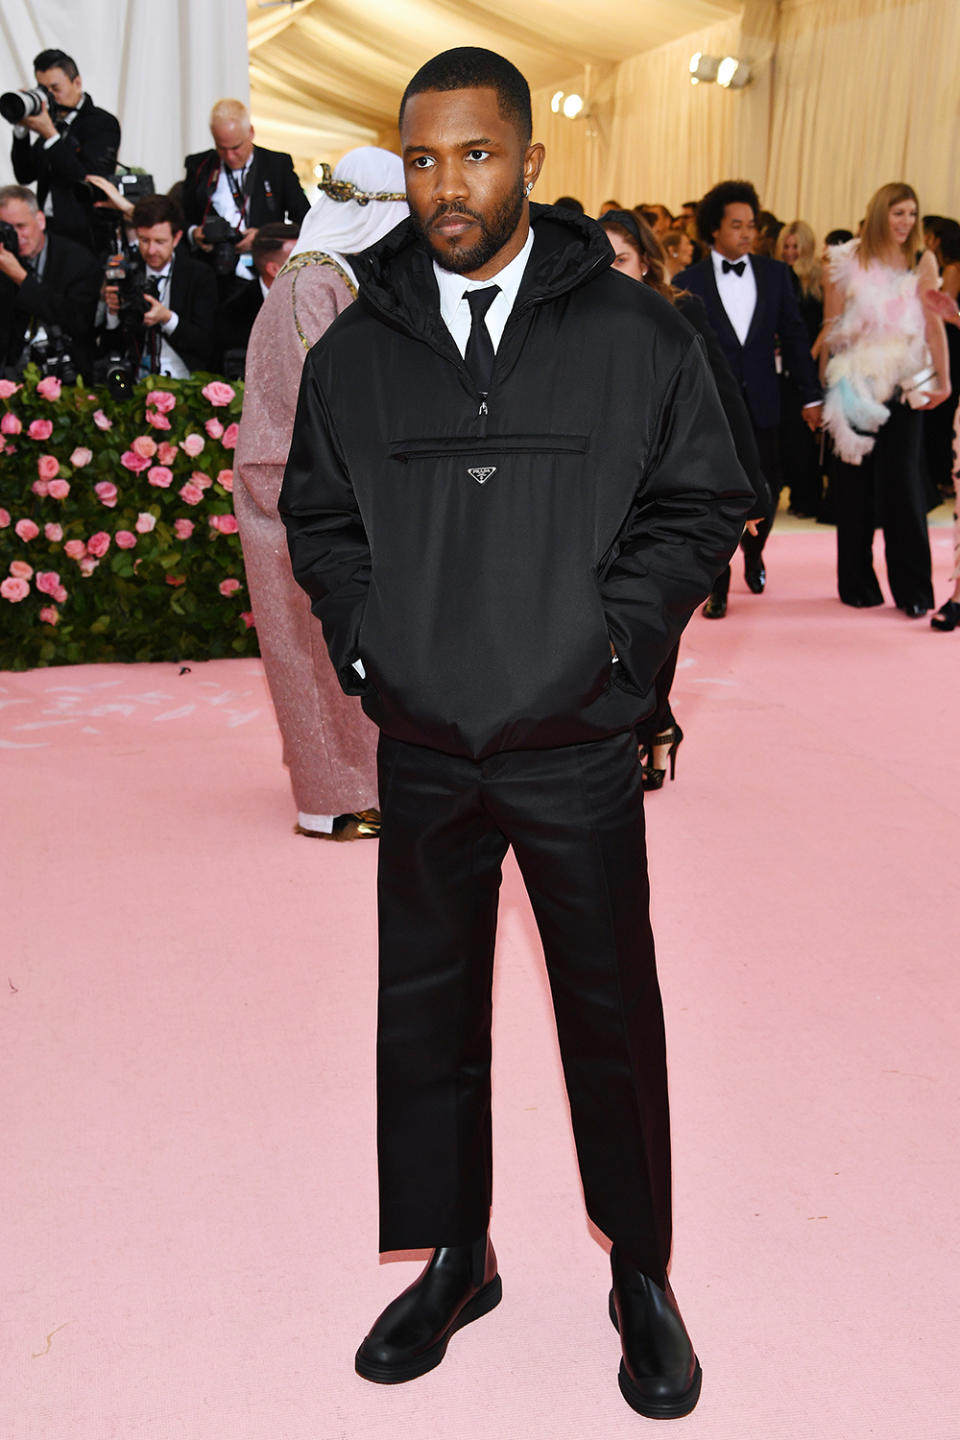 NEW YORK, NEW YORK - MAY 06: Frank Ocean attends The 2019 Met Gala Celebrating Camp: Notes on Fashion at Metropolitan Museum of Art on May 06, 2019 in New York City. (Photo by Dimitrios Kambouris/Getty Images for The Met Museum/Vogue)